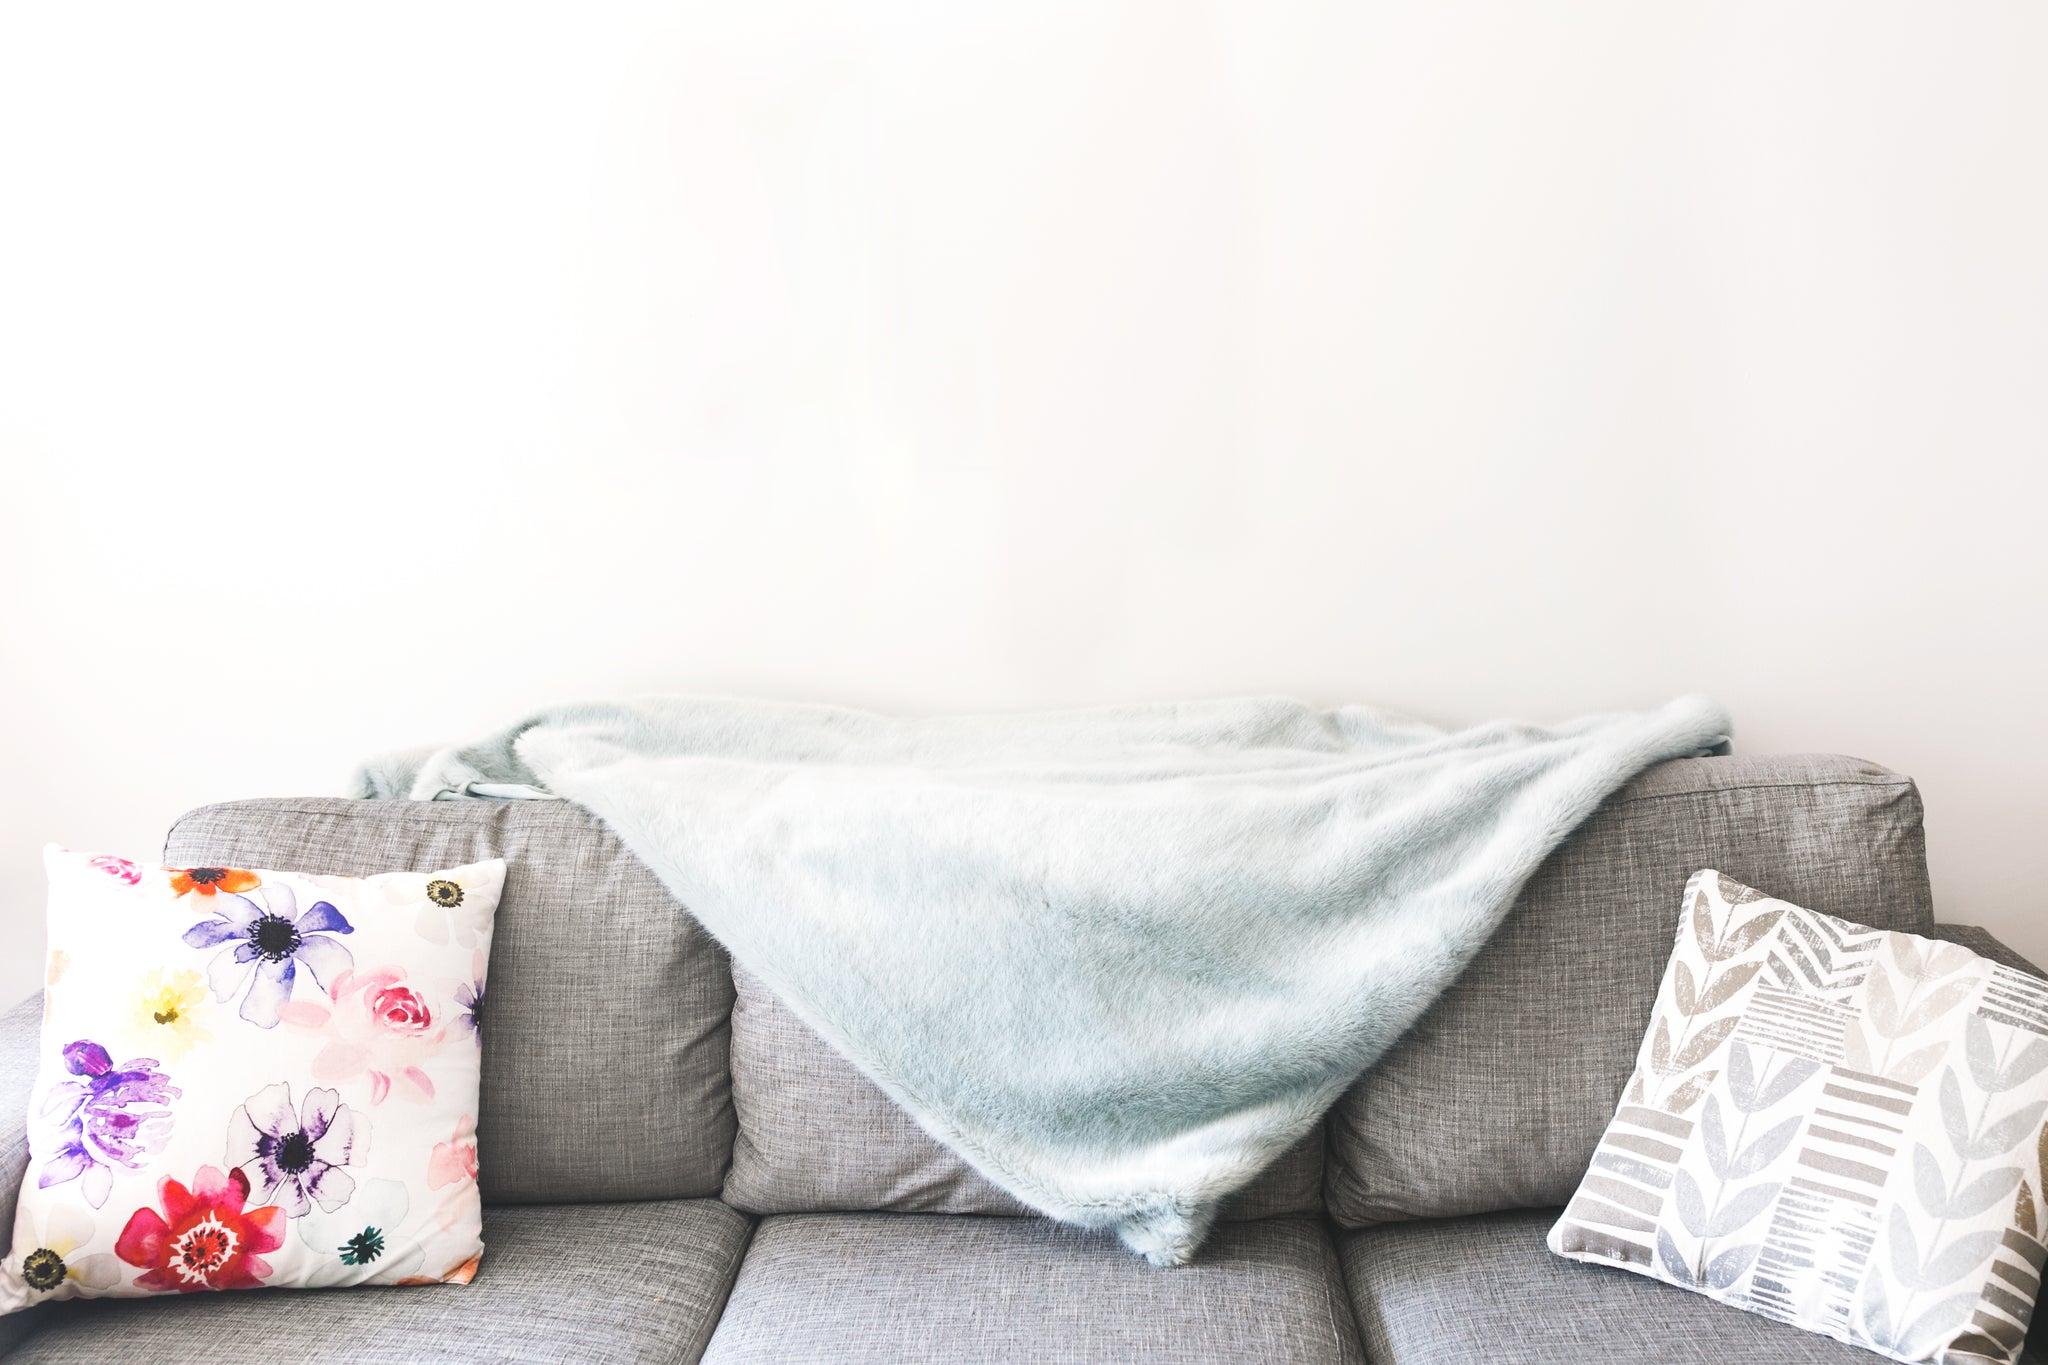 HOW DO I KEEP MY COUCH COVERS FROM SLIDING? – HOTNIU